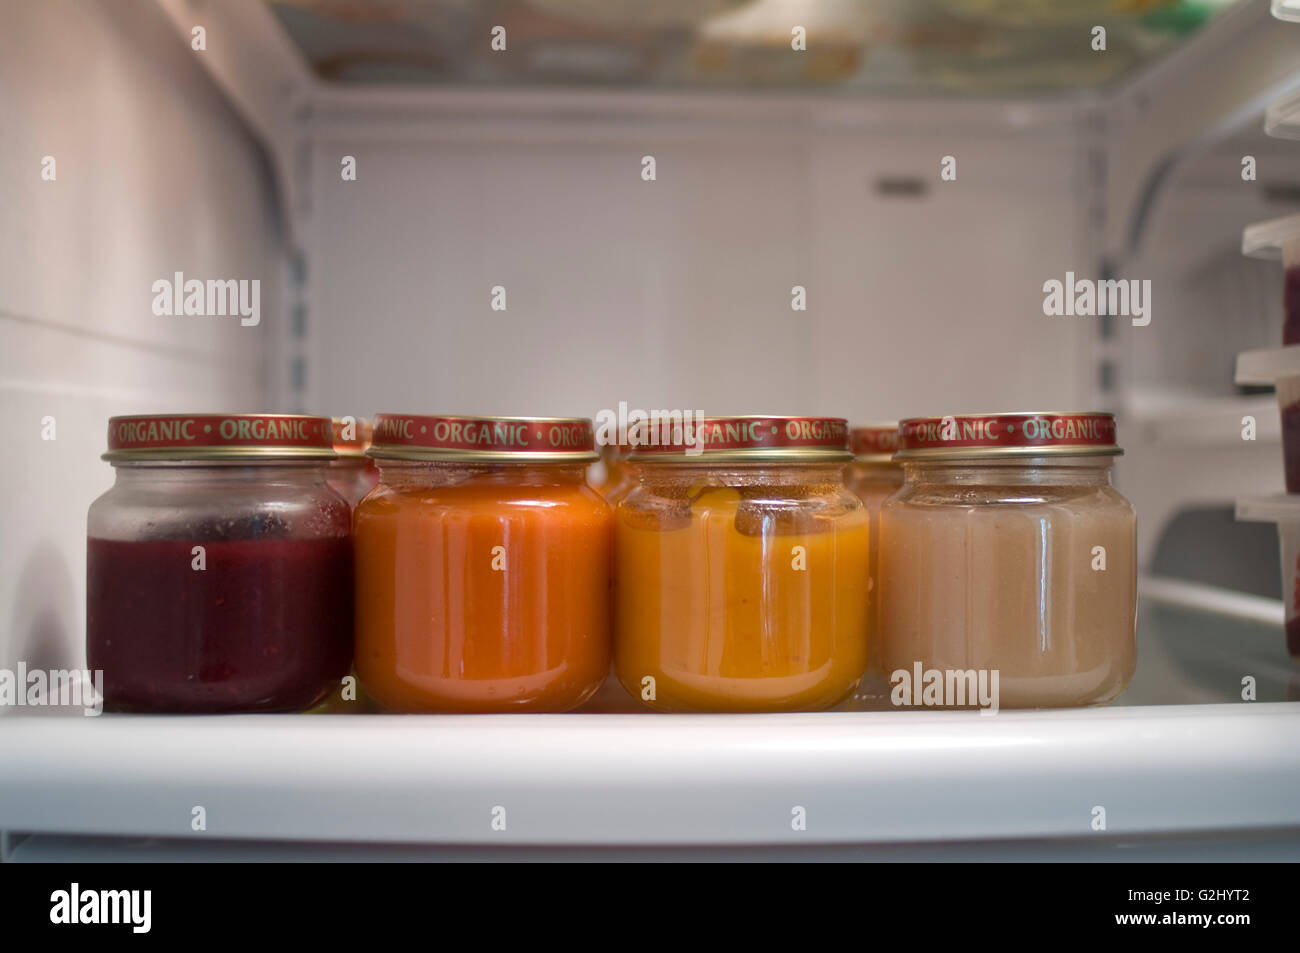 Download Baby Food Jars High Resolution Stock Photography And Images Alamy Yellowimages Mockups